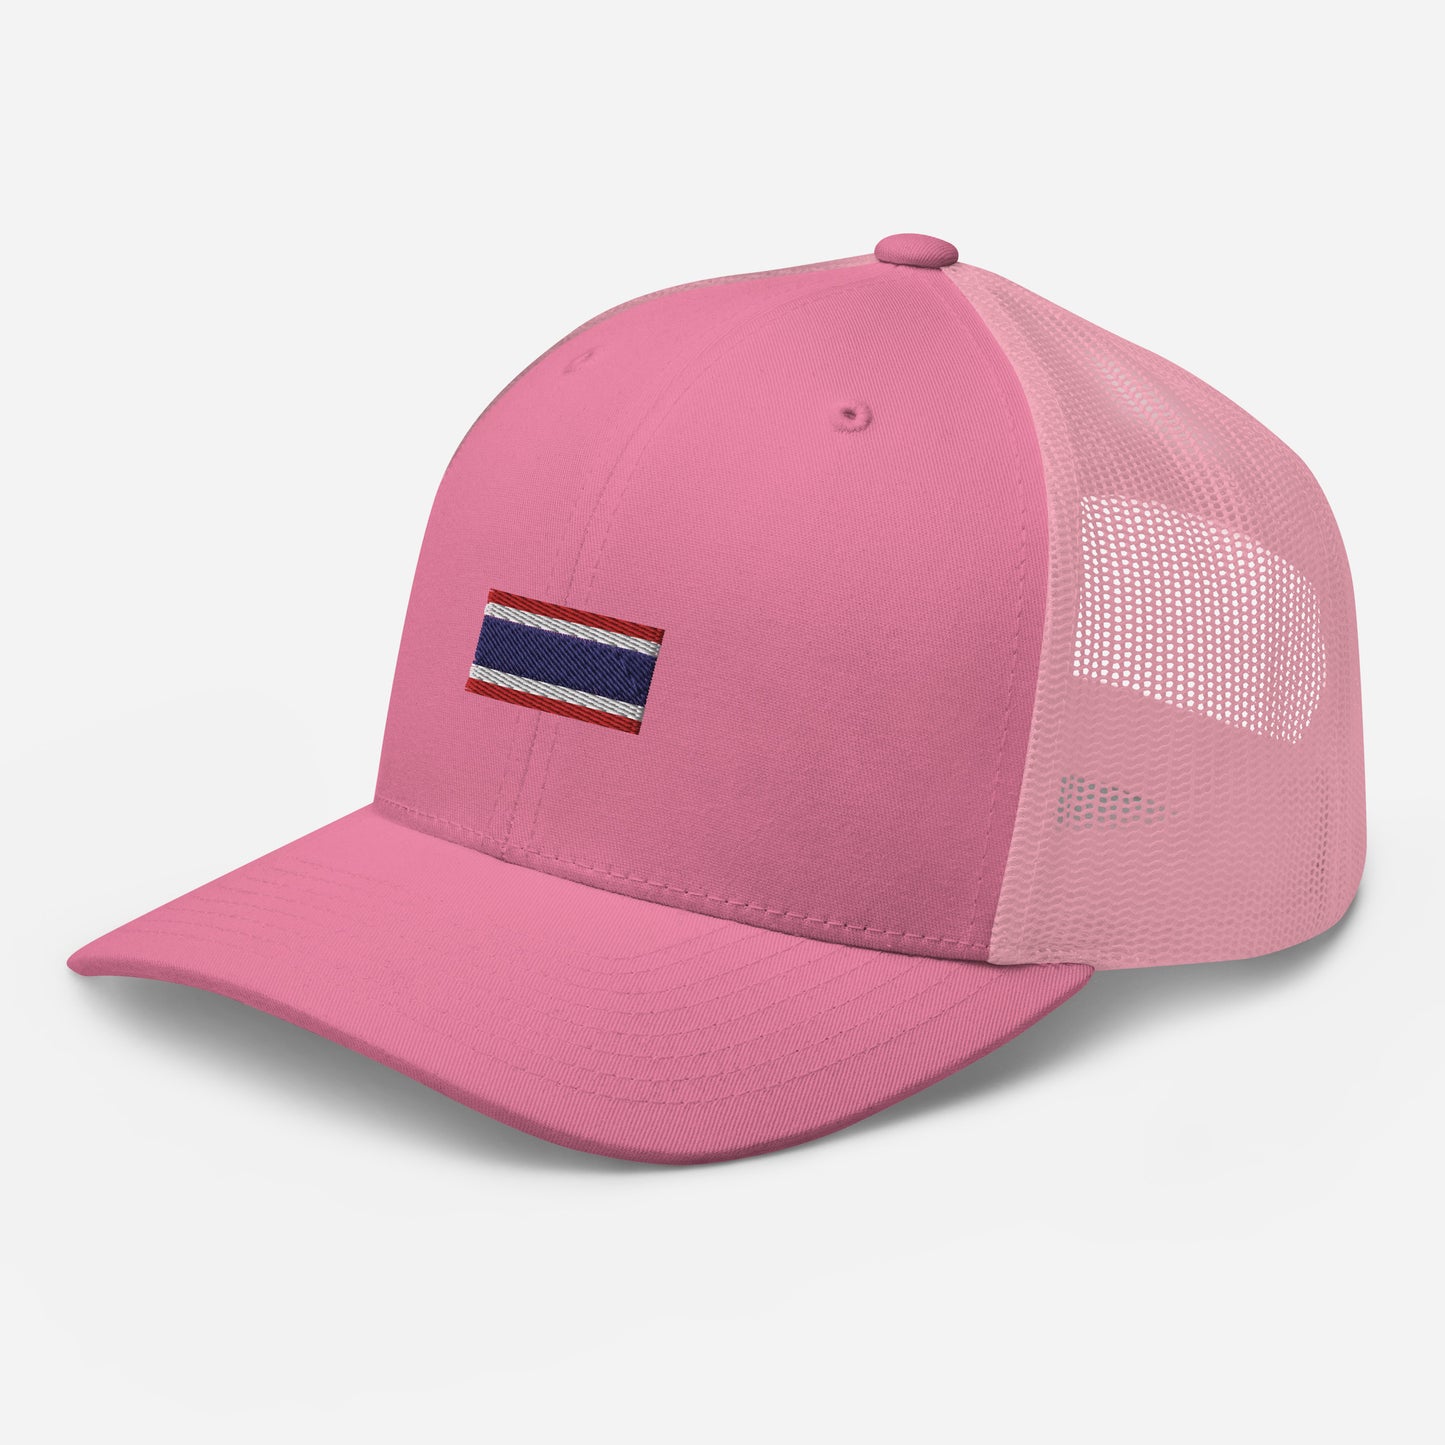 cap-from-the-front-with-thai-flag